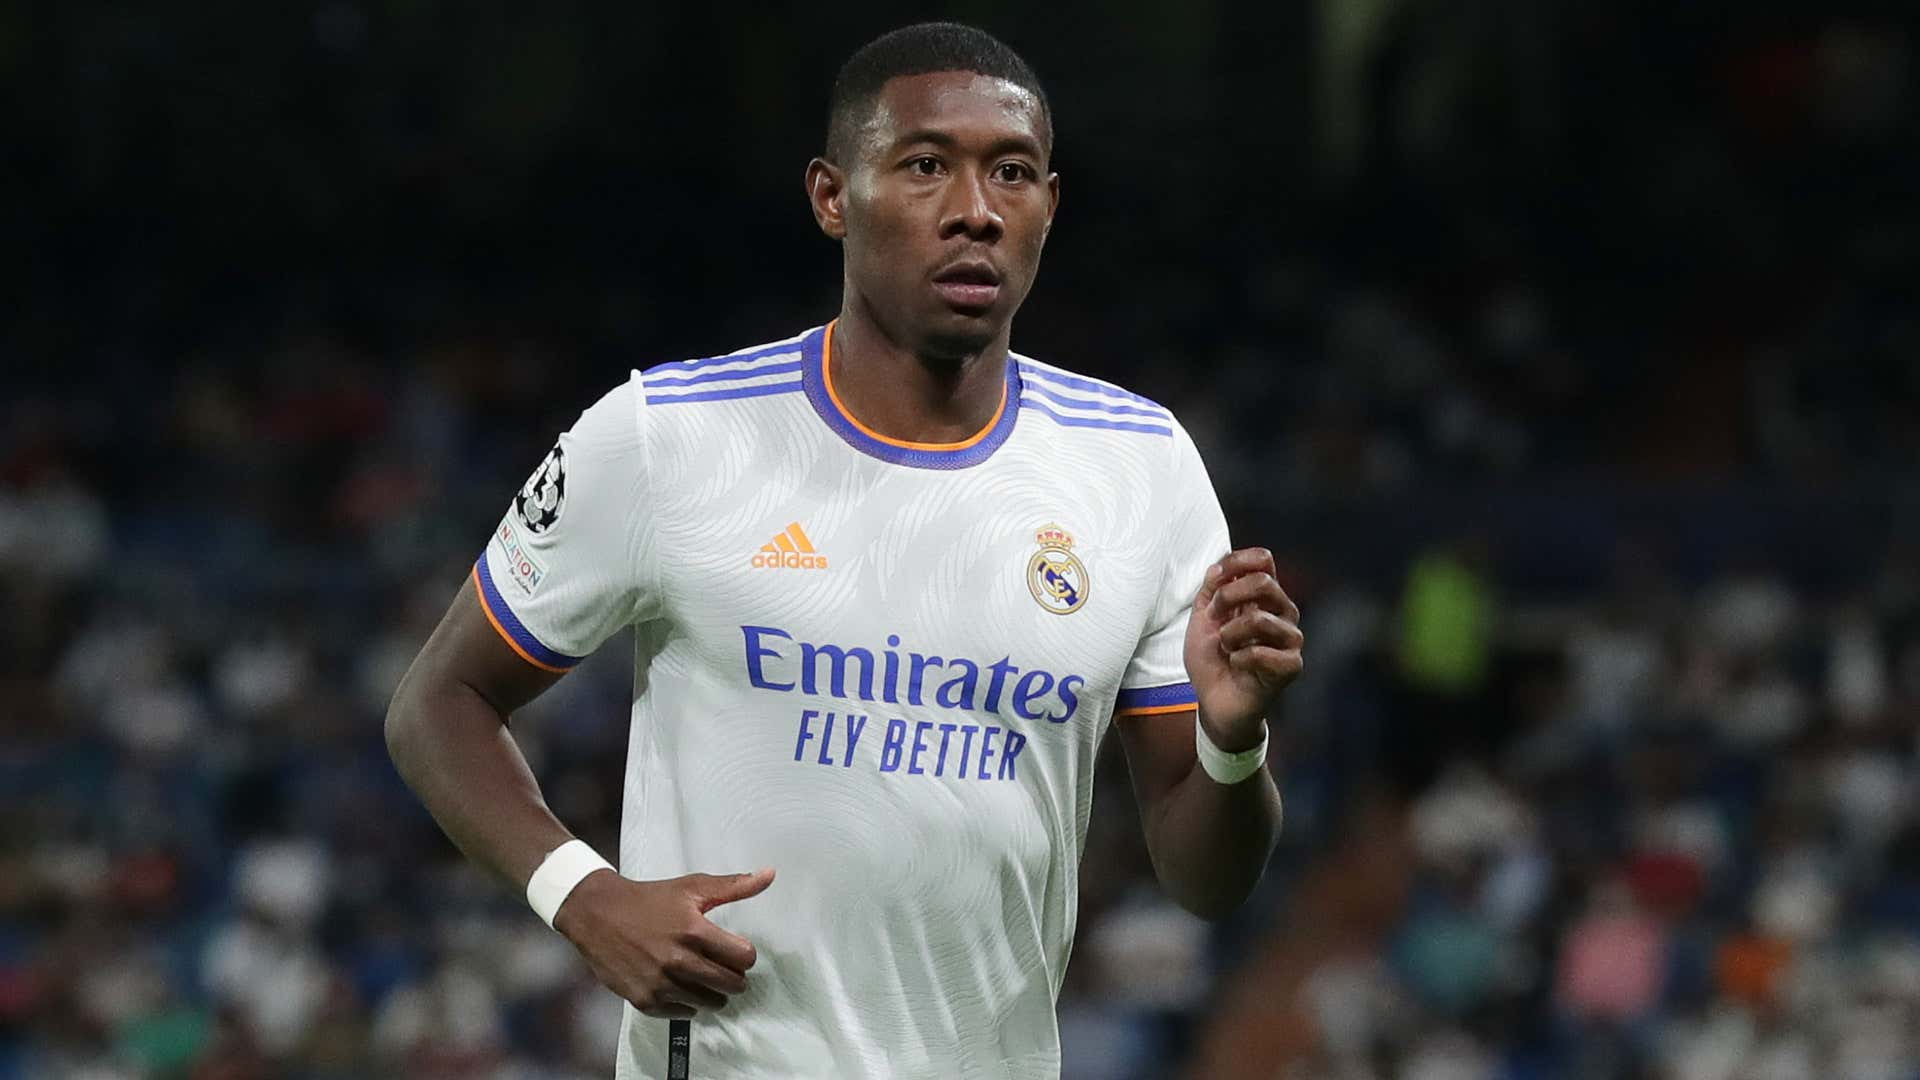 Relief for Real Madrid as Alaba knee injury not serious & he's expected to be fit for Shakhtar clash